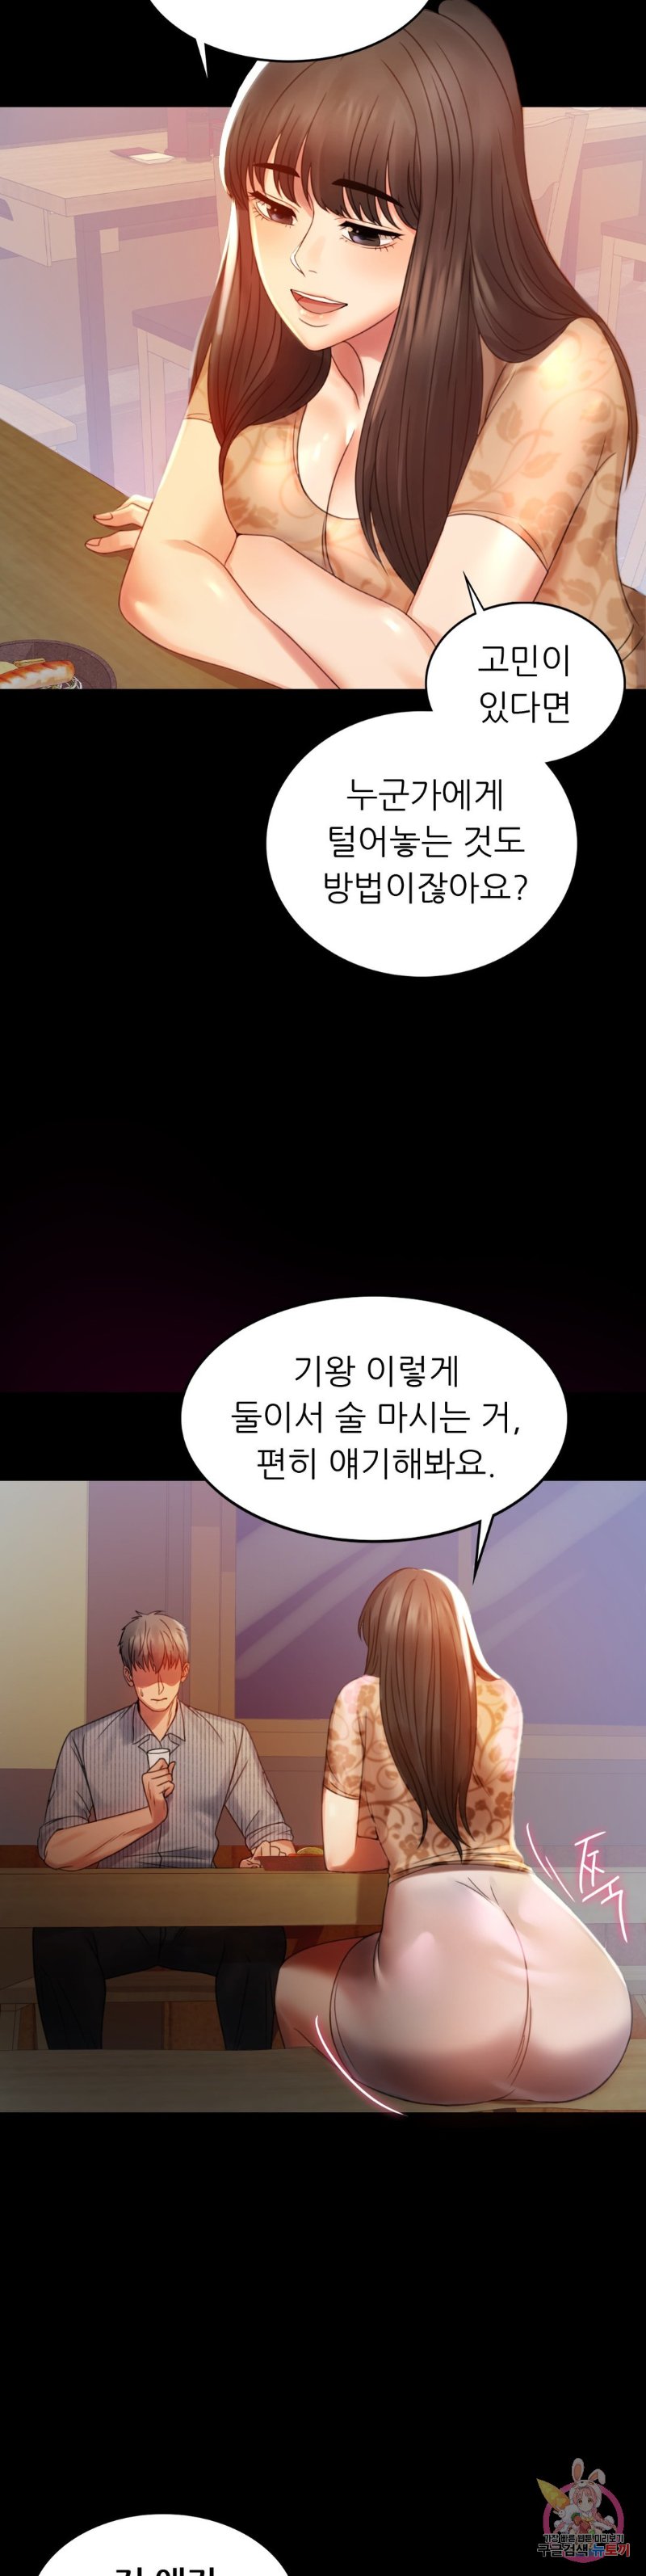 illicitlove Raw - Chapter 4 Page 17